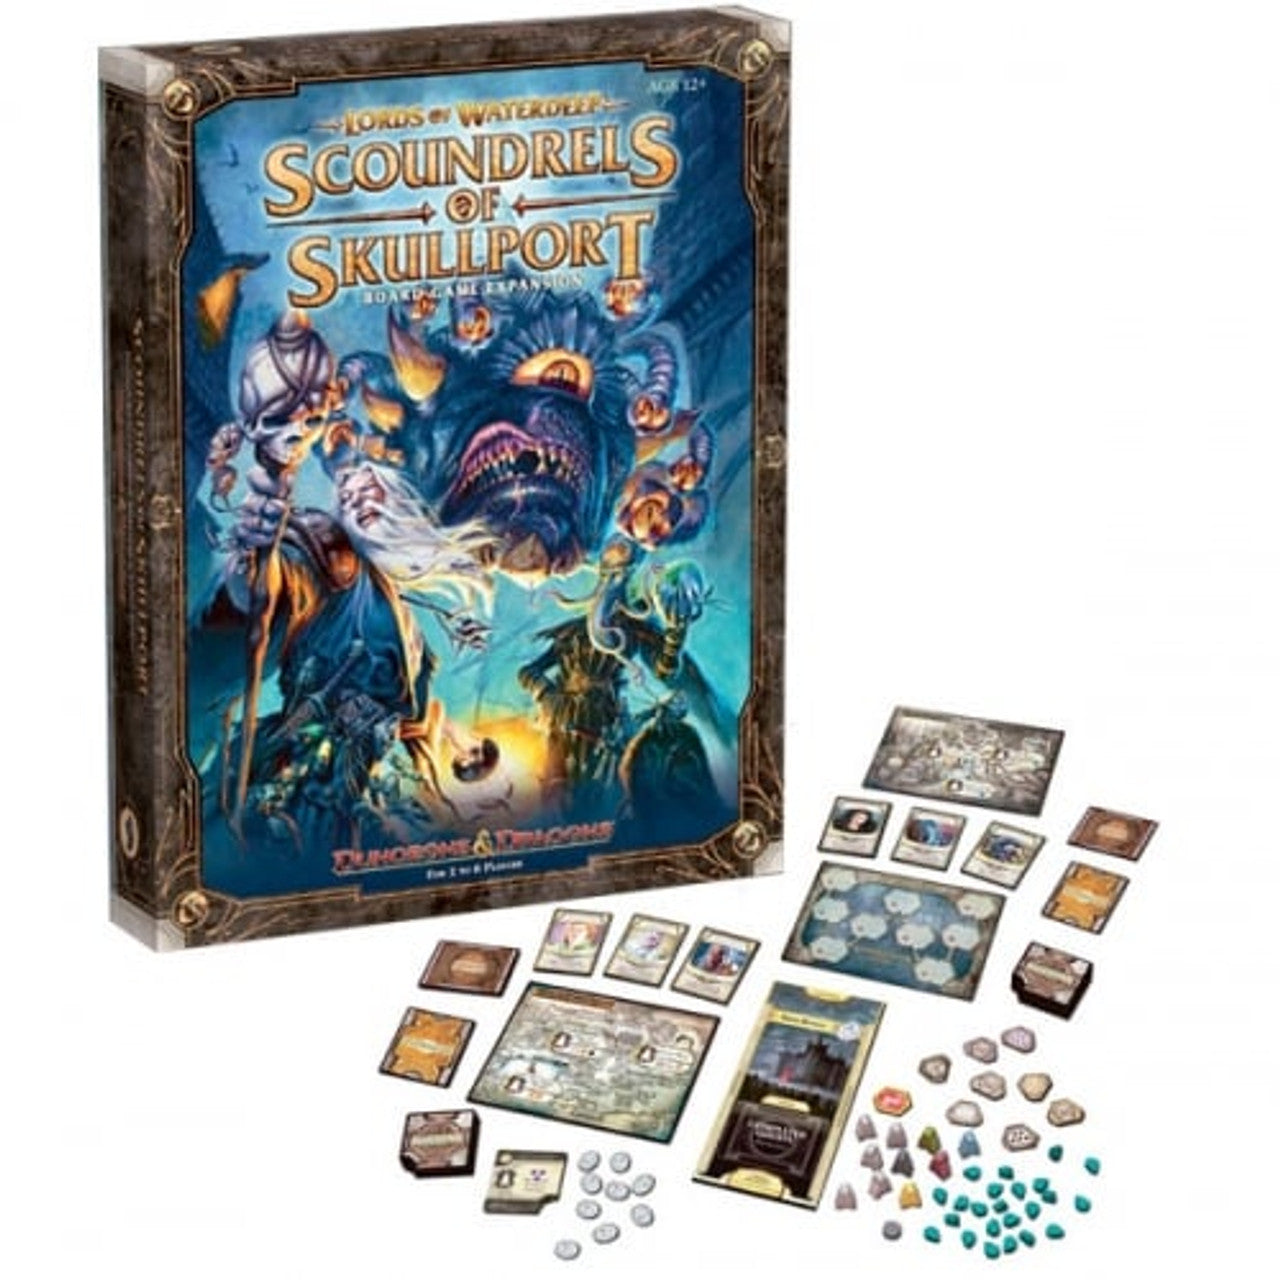 Dungeons & Dragons - Lords Of Waterdeep - Scoundrels Of Skullport Expansion - Loaded Dice Barry Vale of Glamorgan CF64 3HD